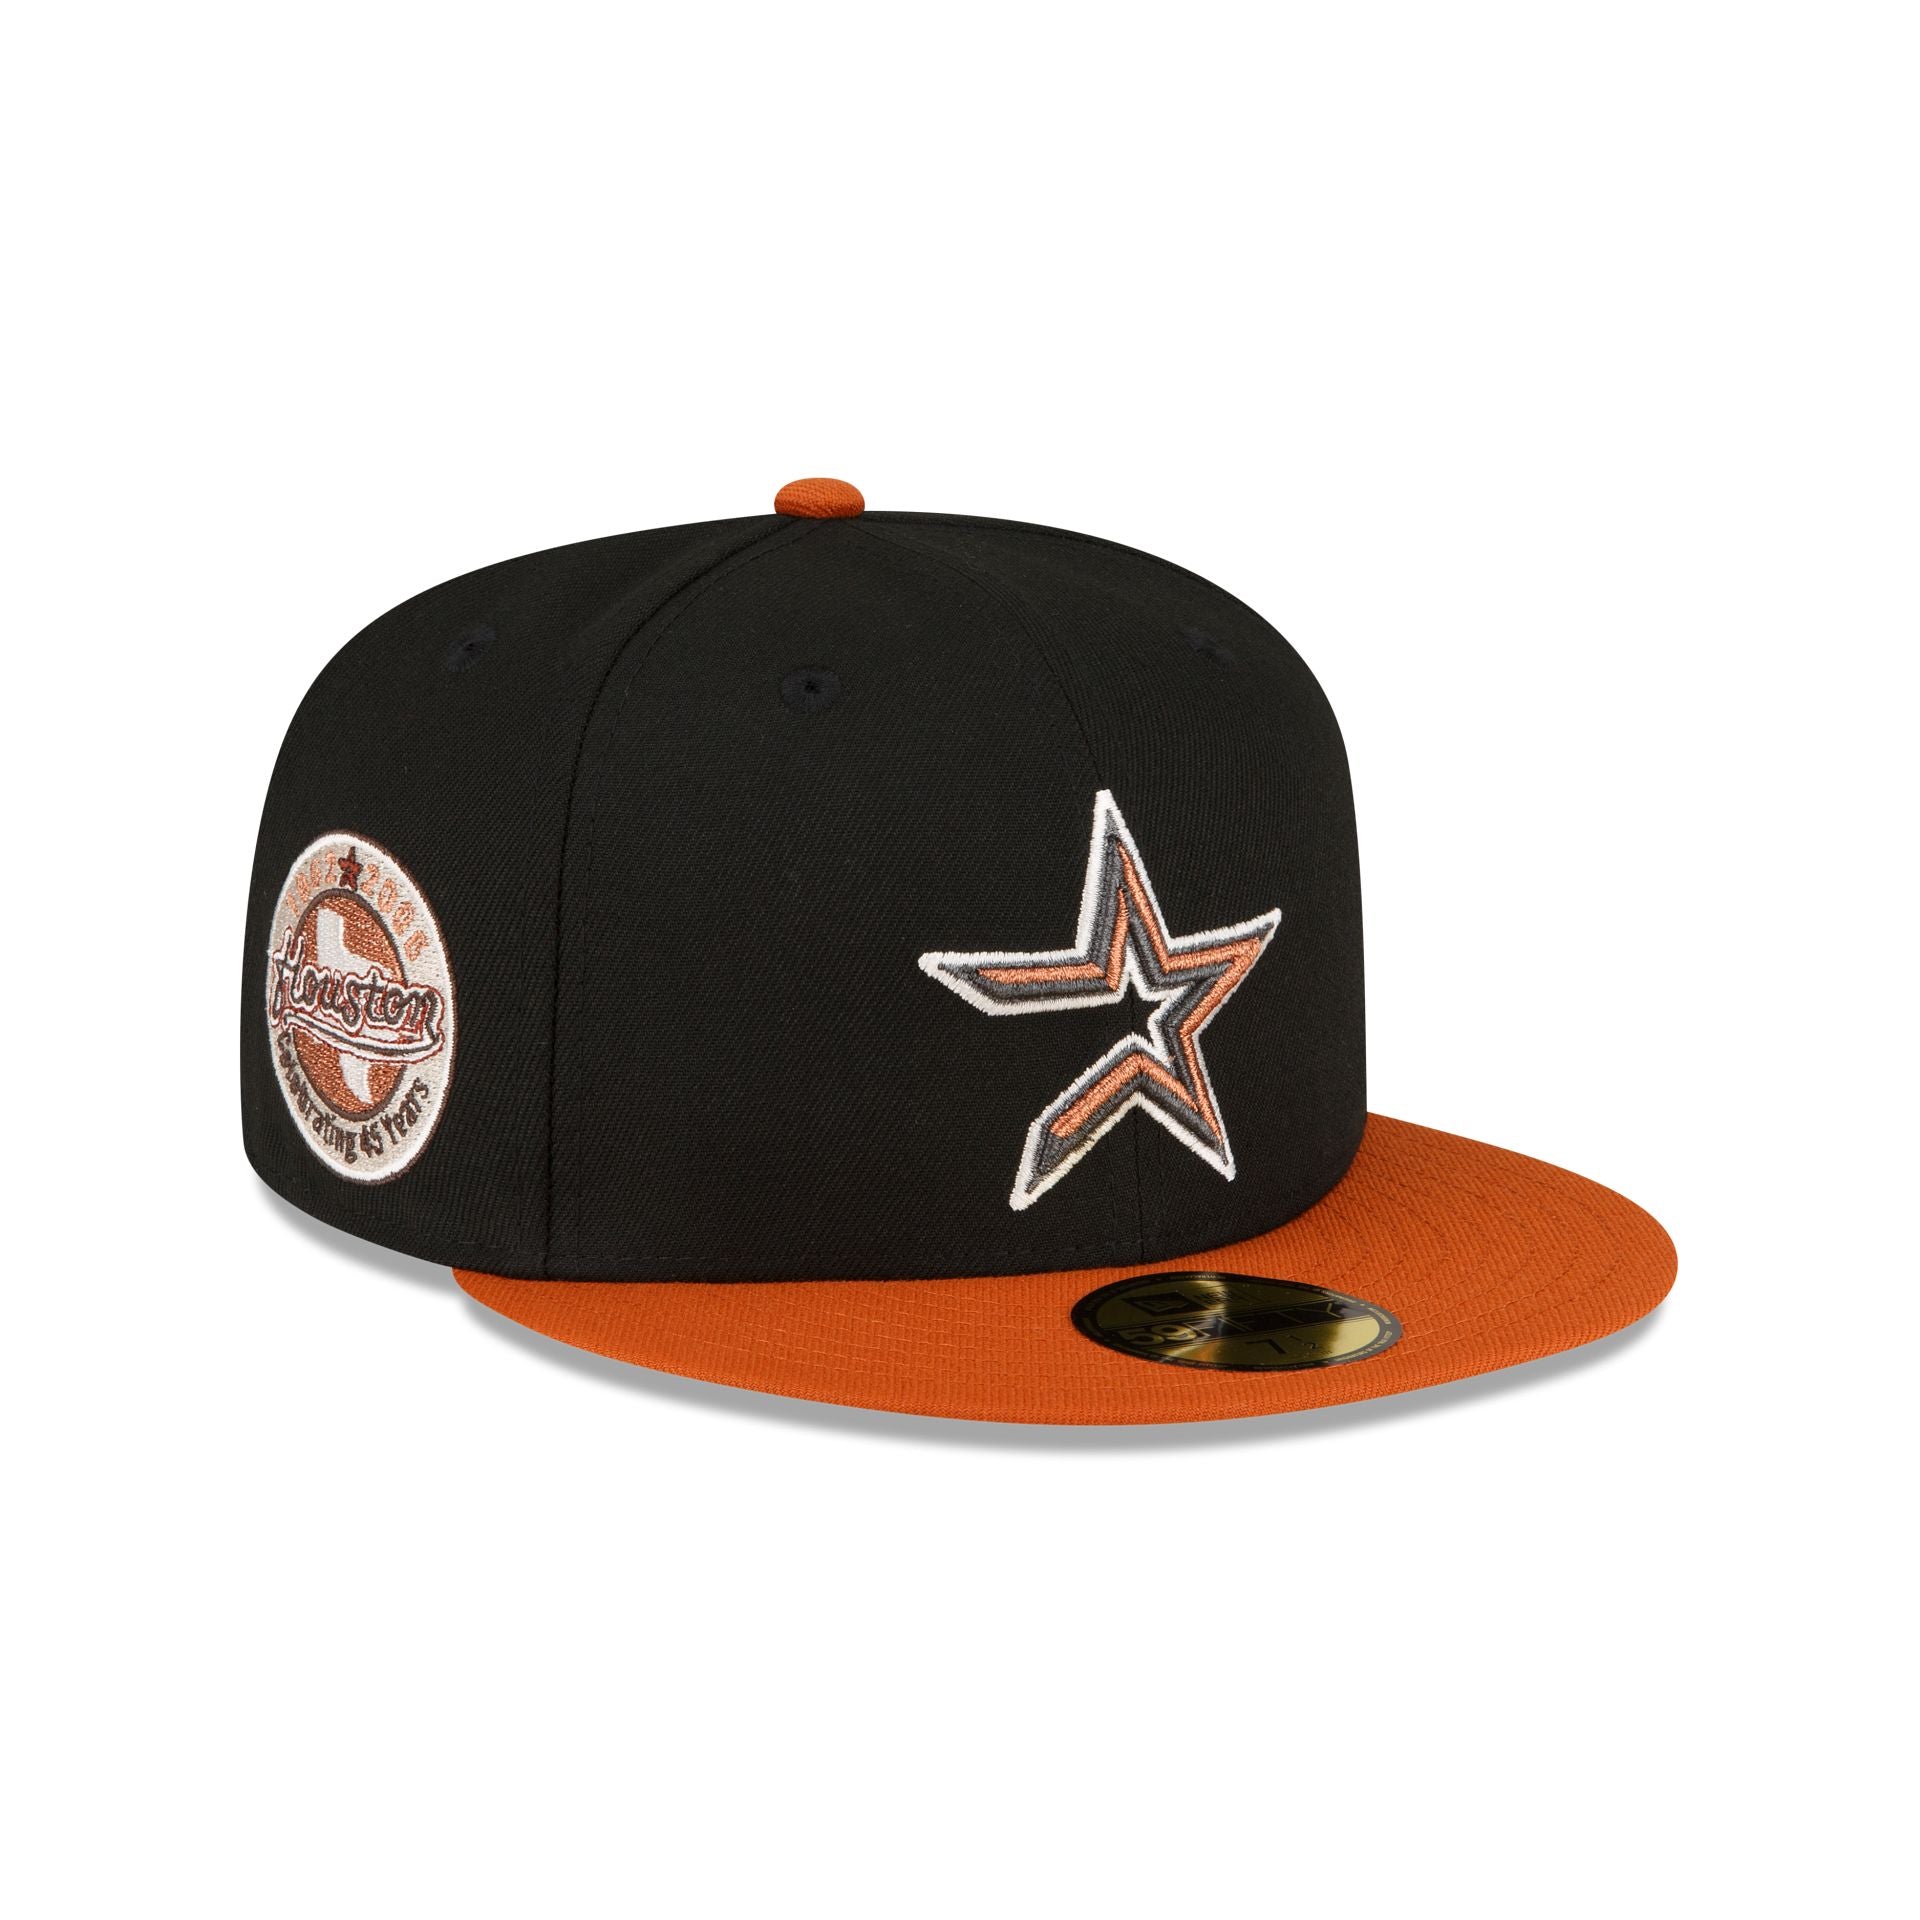 Just Caps Drop 22 St. Louis Browns 59FIFTY Fitted Hat, White - Size: 7 1/2, MLB by New Era